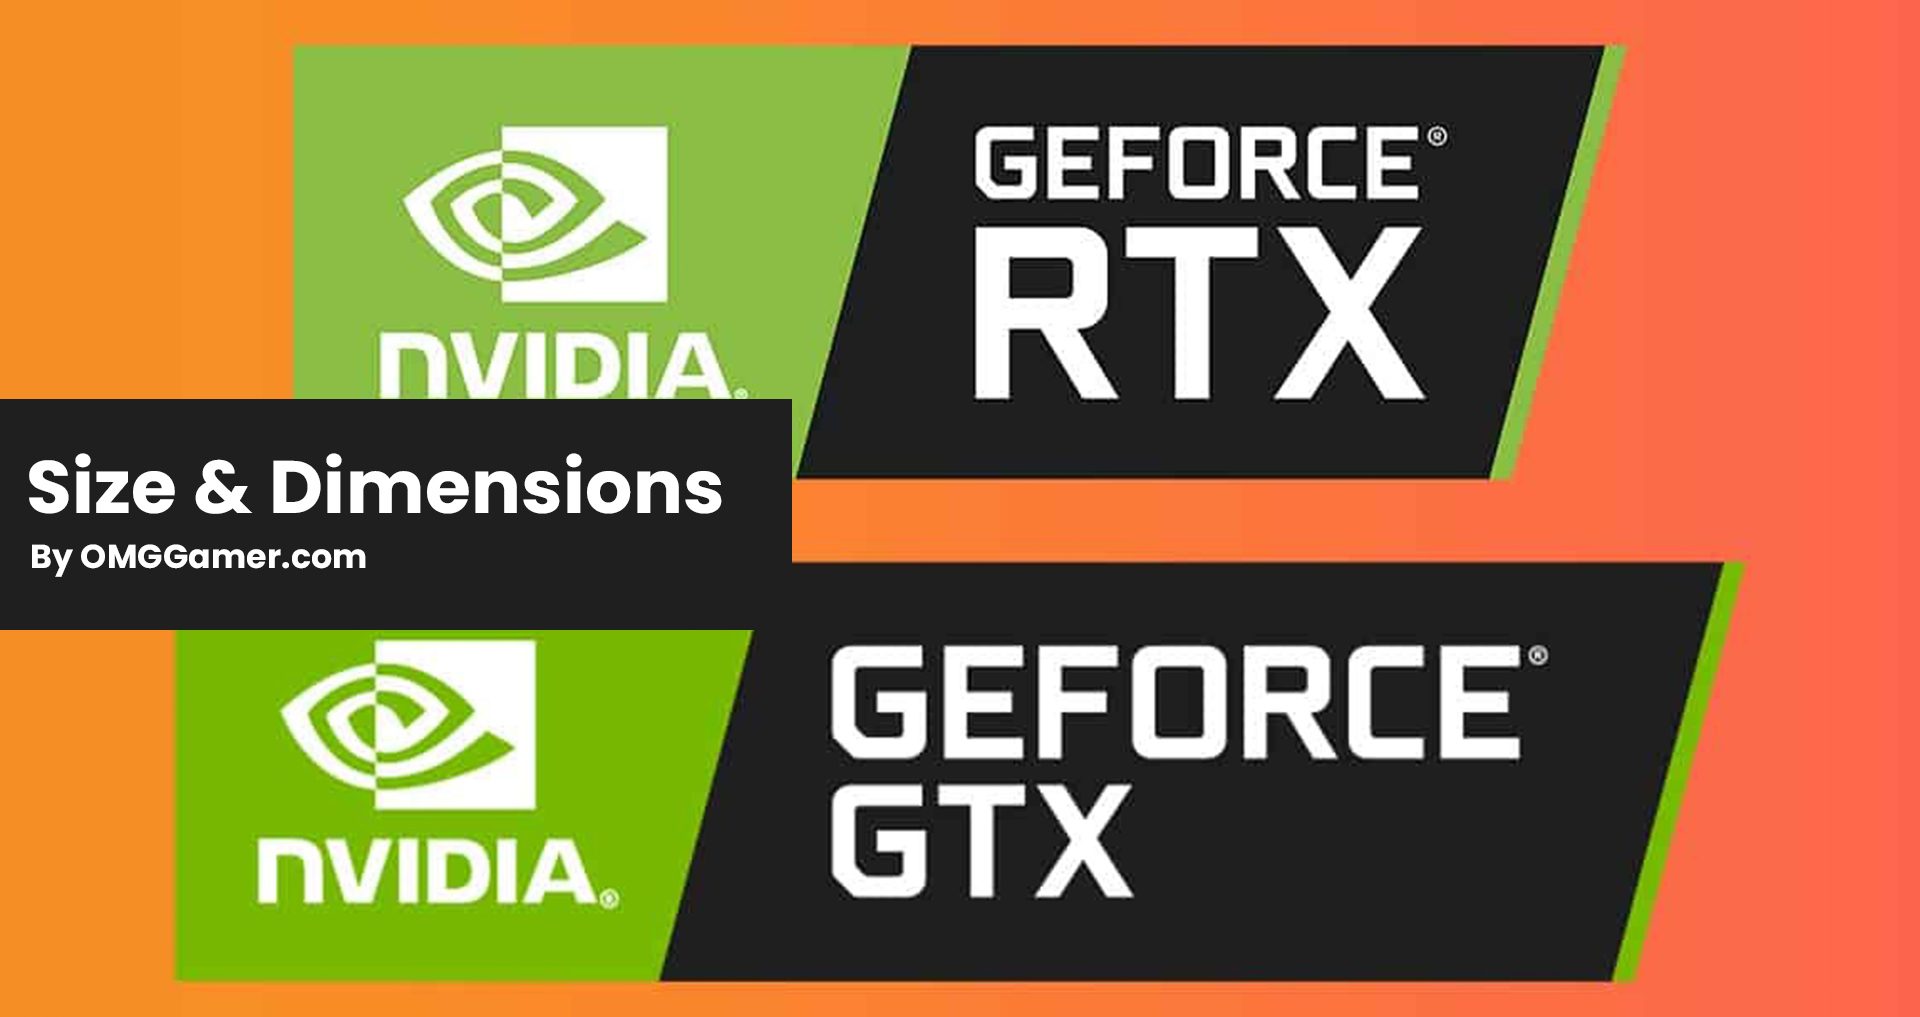 Size & Dimensions of GTX and RTX